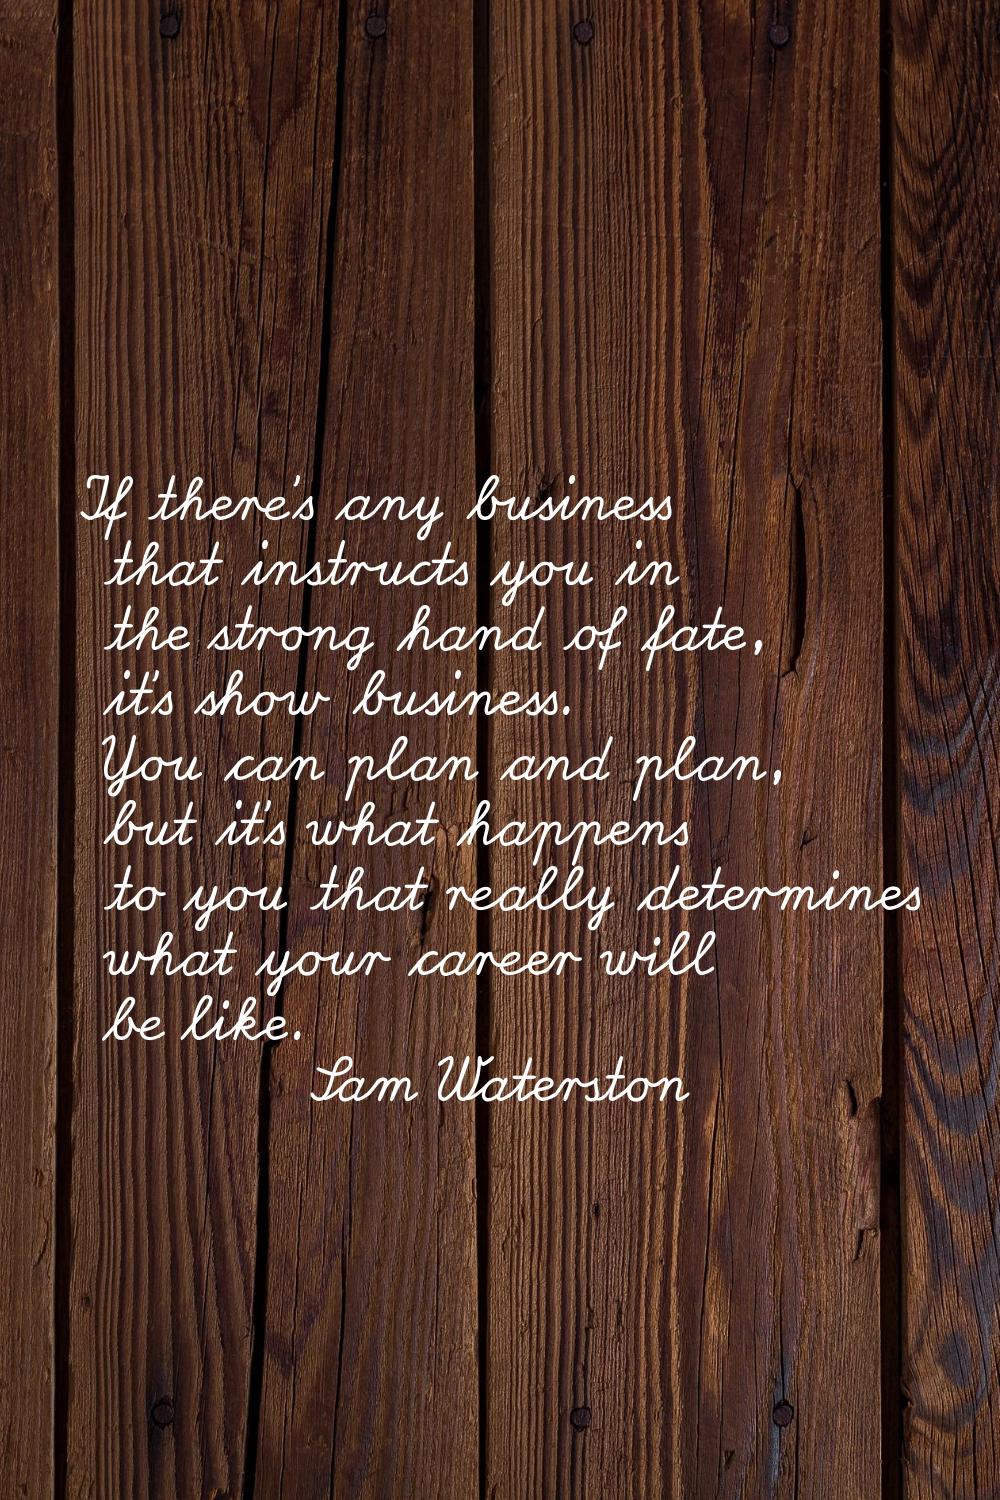 If there's any business that instructs you in the strong hand of fate, it's show business. You can 